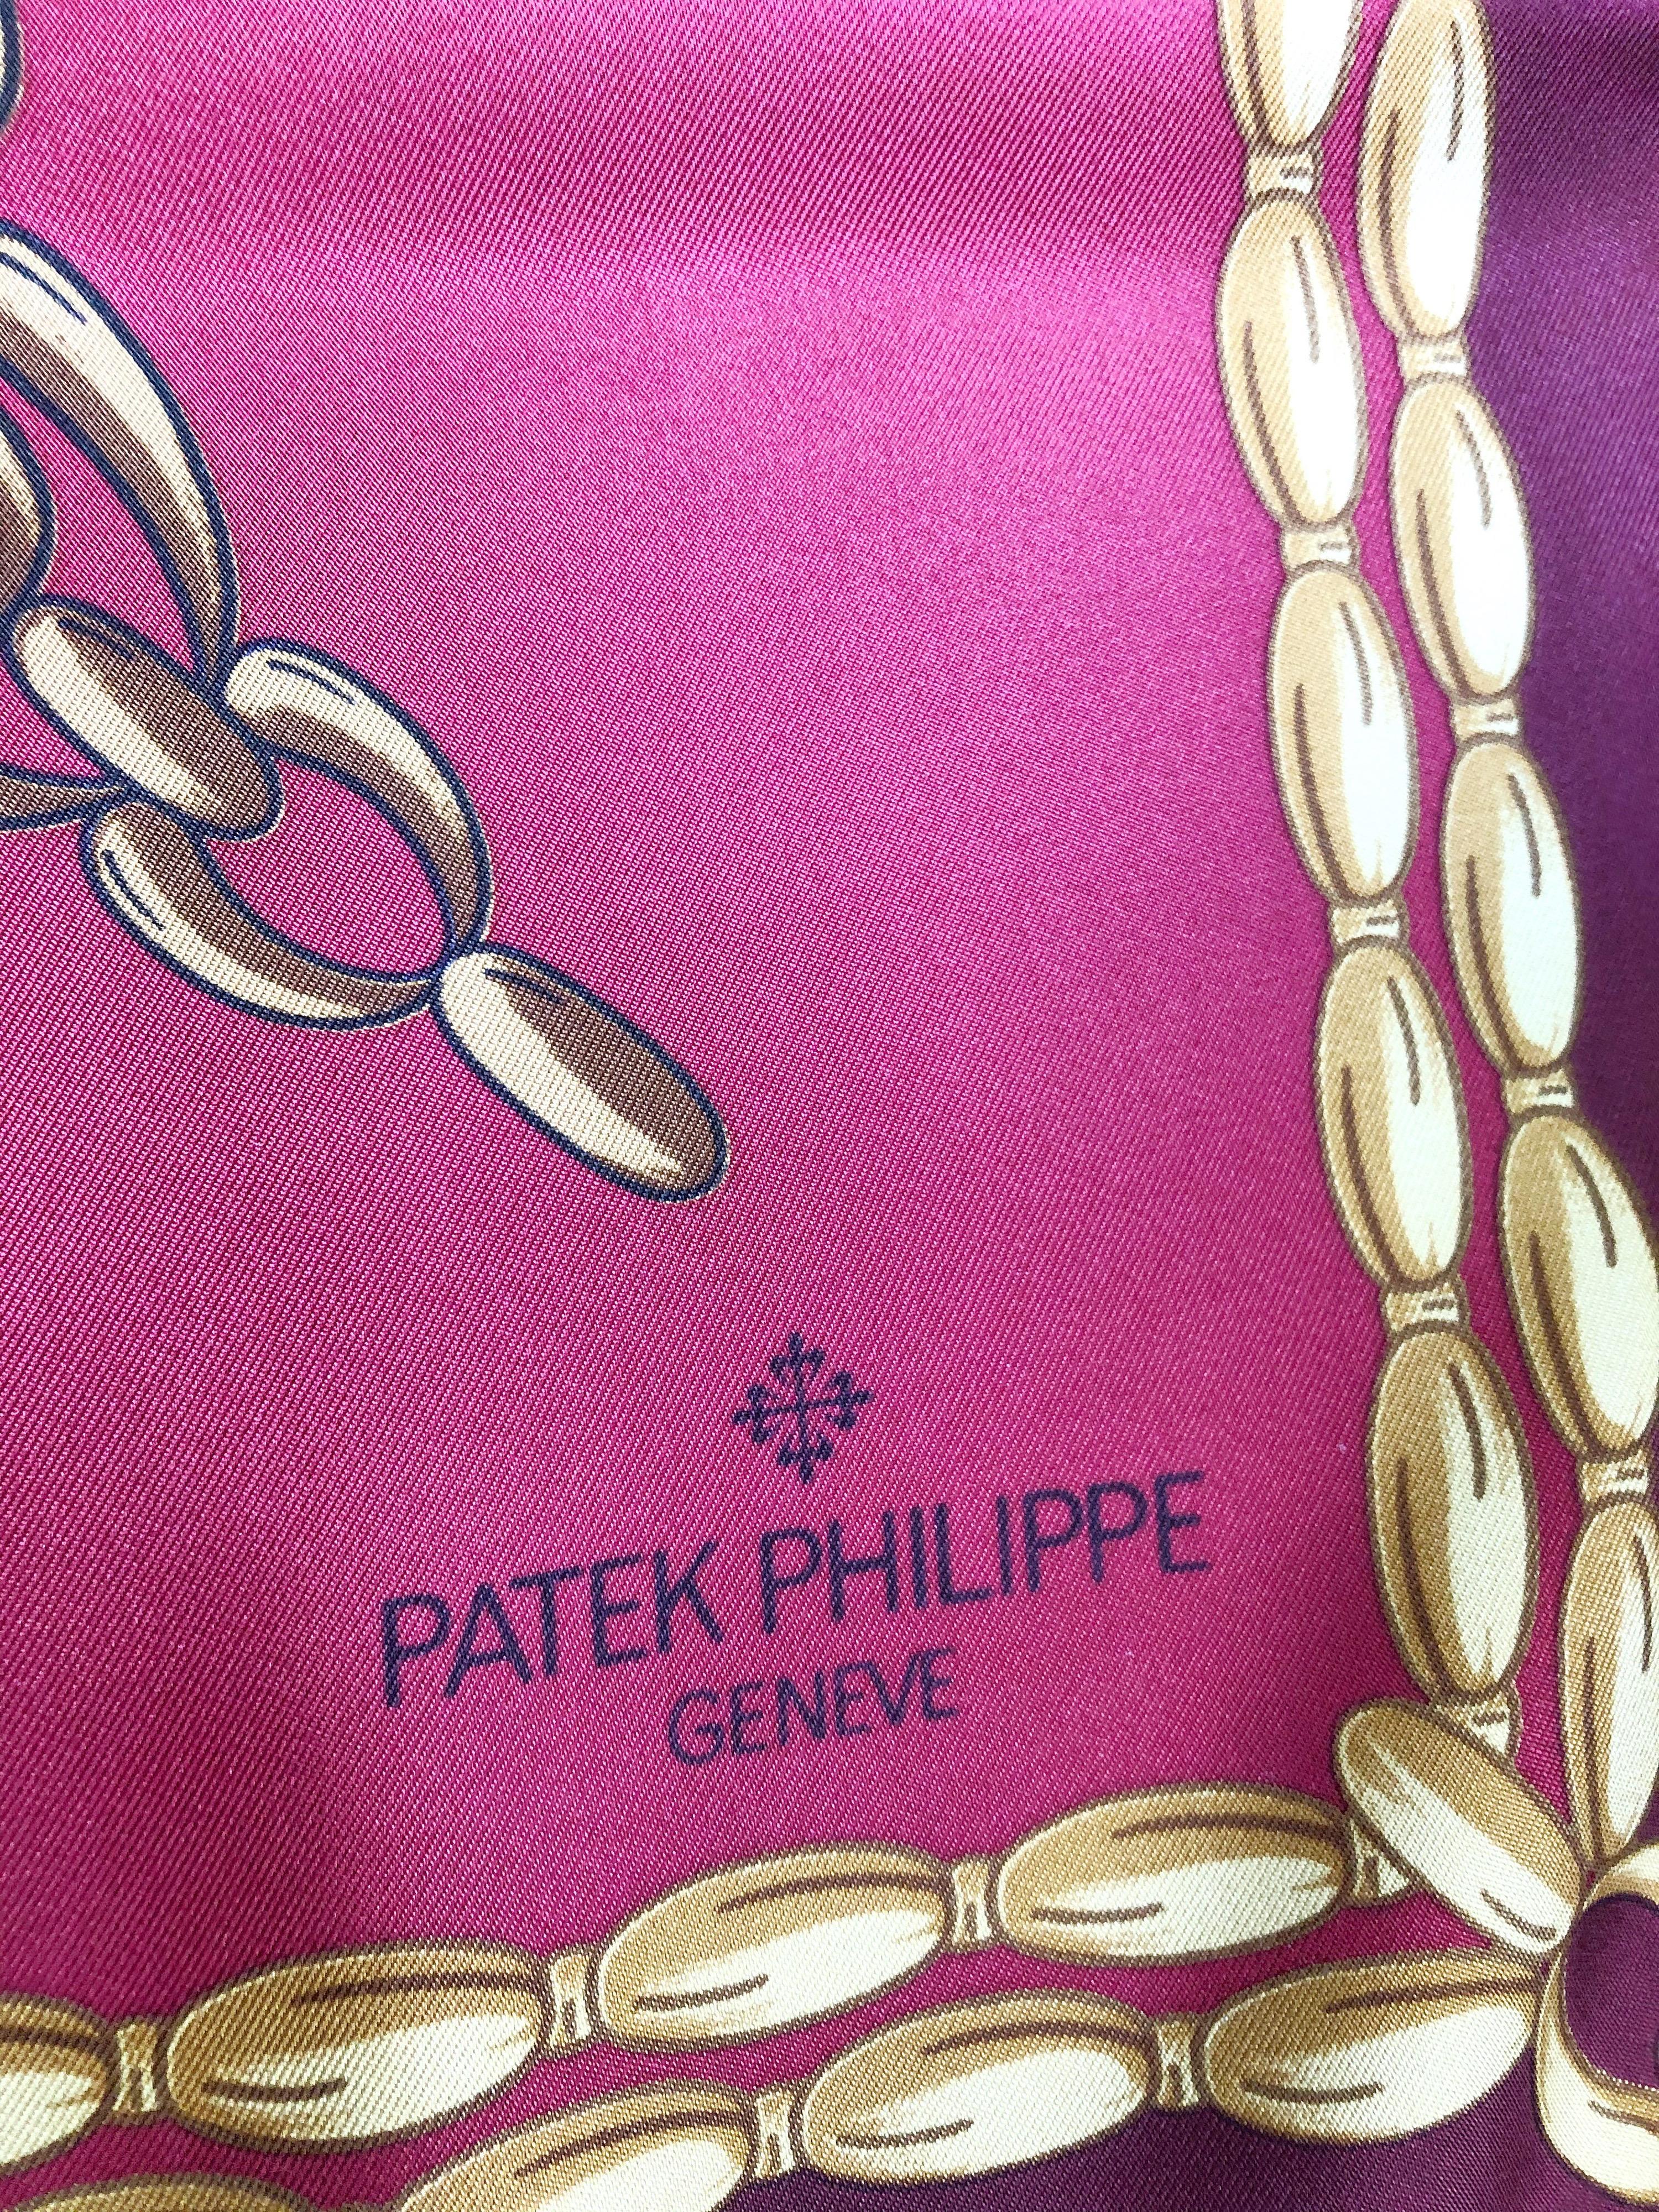 New never worn 90s PATEK PHILIPPE novelty watch print large silk scarf / shawl with original box ! Warm colors of red, green, blue, white and gold throughout. Signed at bottom left corner. Hand rolled edges. Never worn and comes with original box.